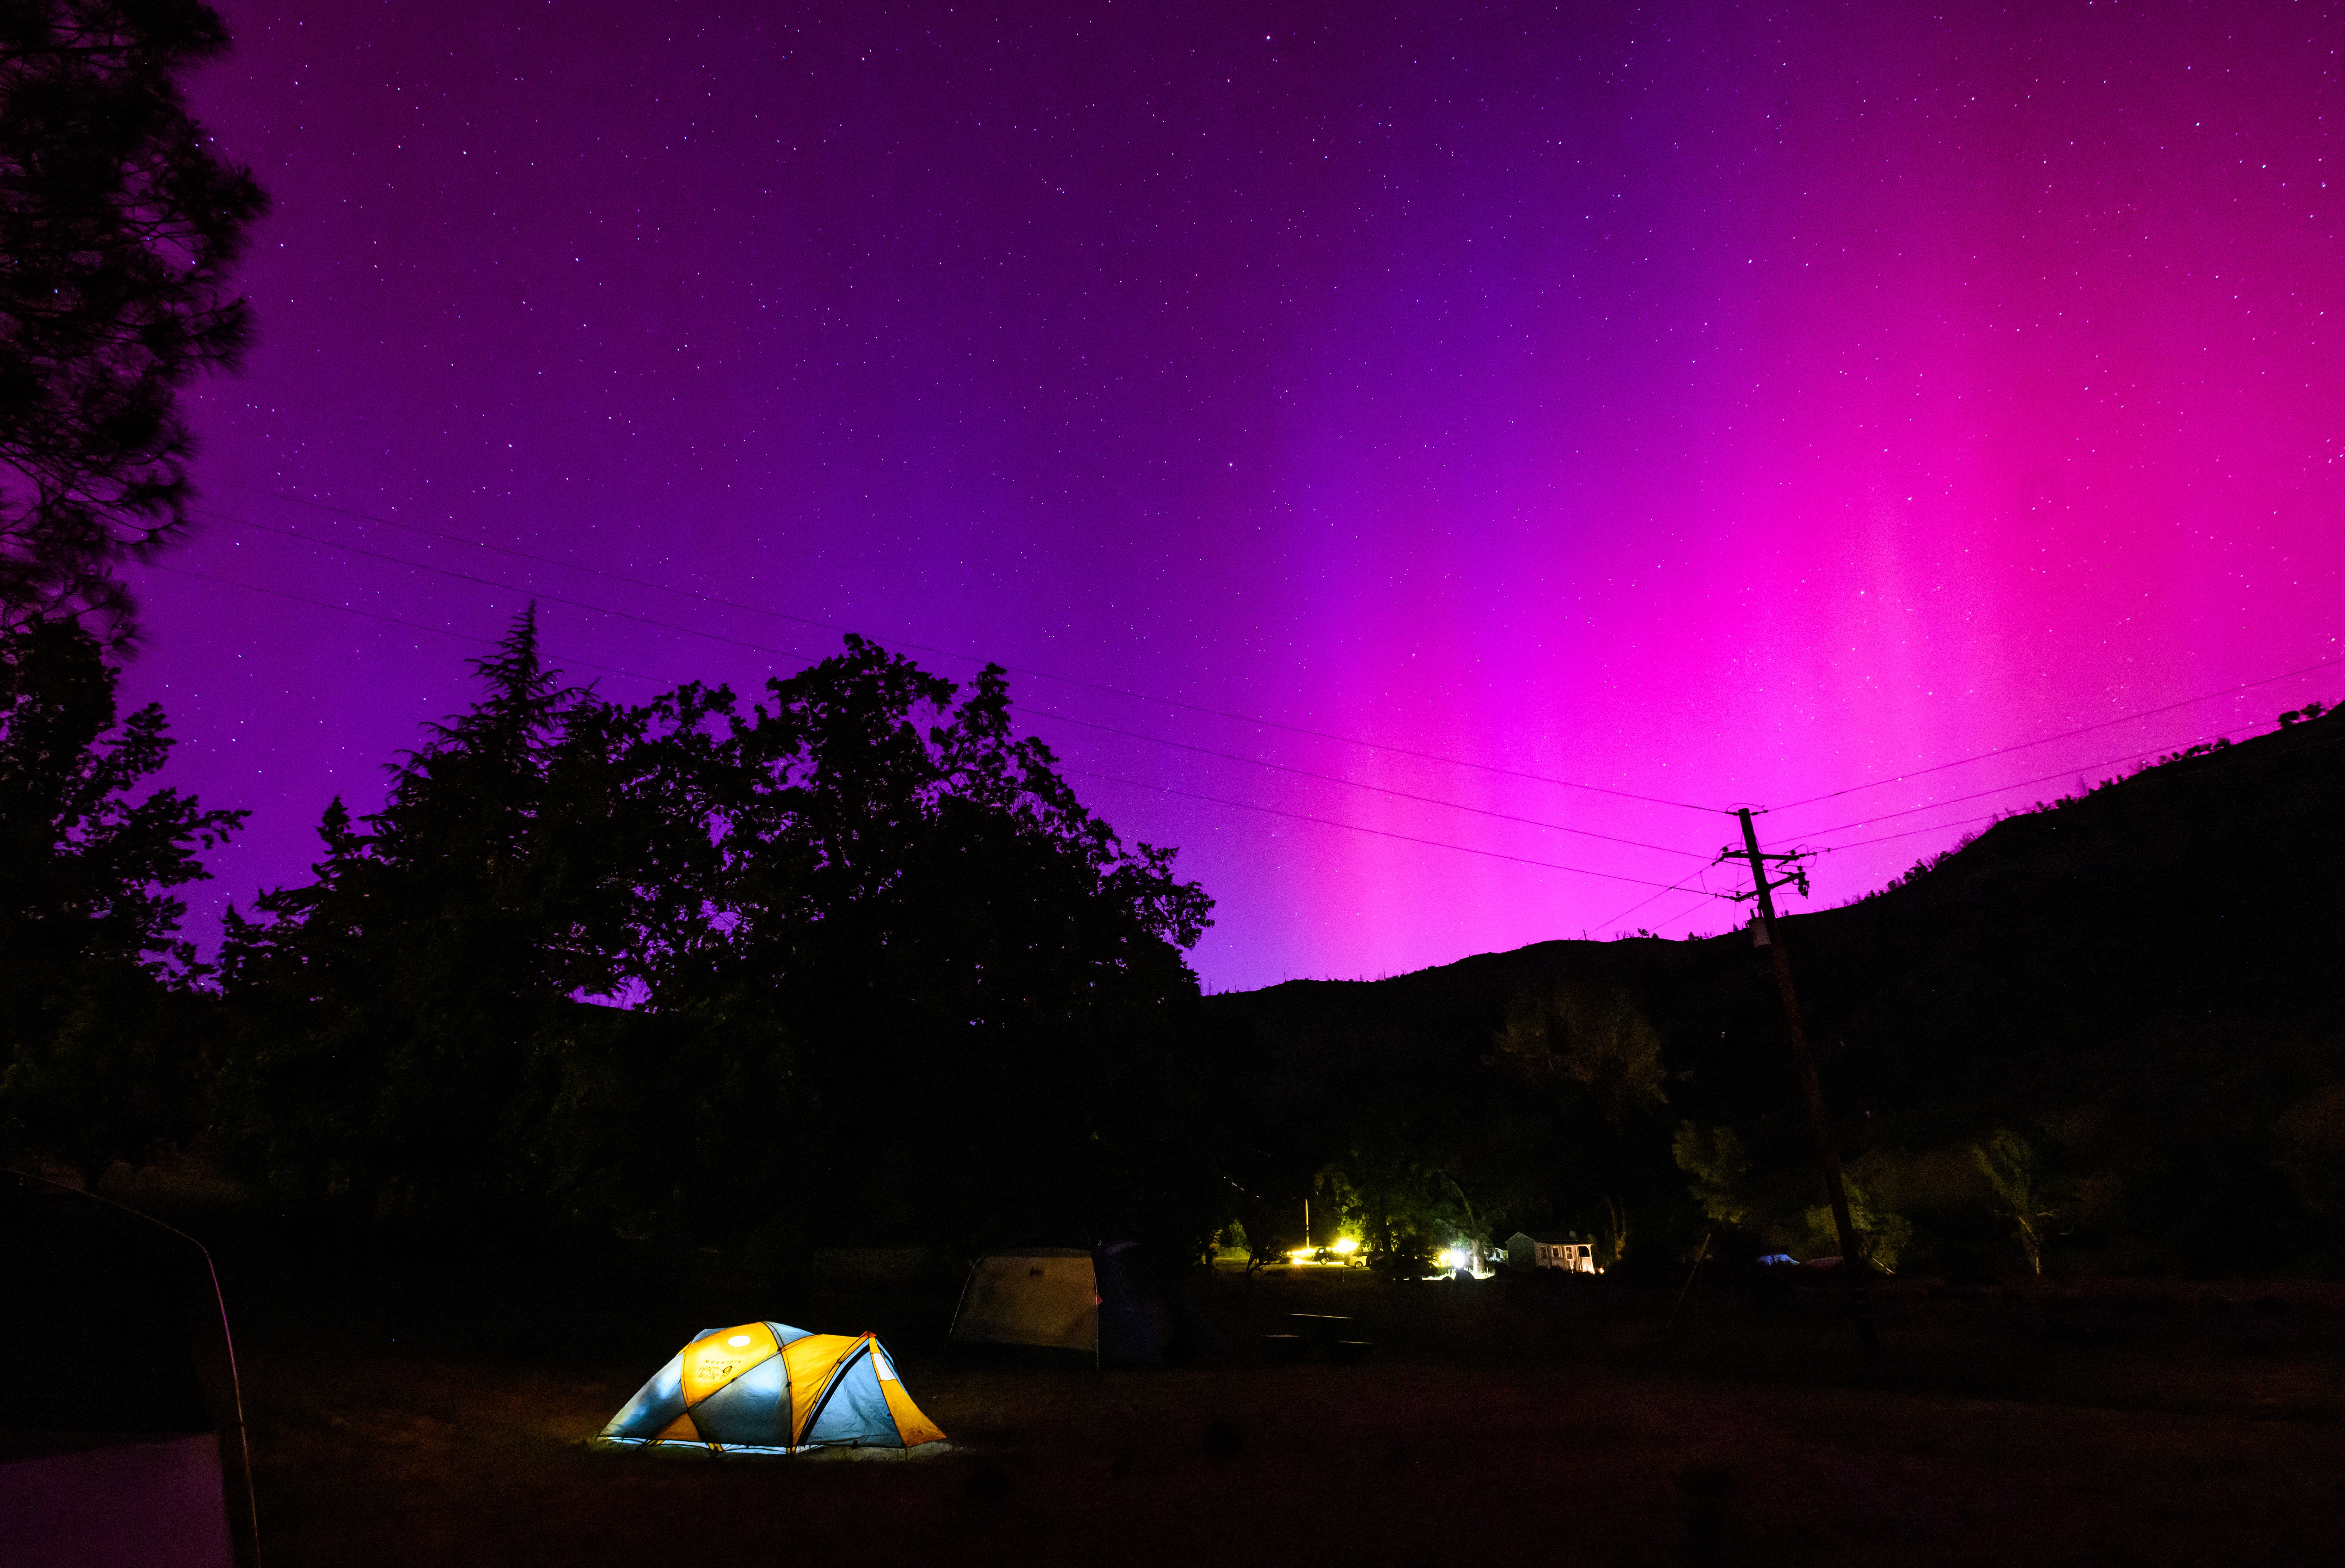 Northern lights or aurora borealis illuminate the night sky over a camper’s tent north of San Francisco in Middletown, California